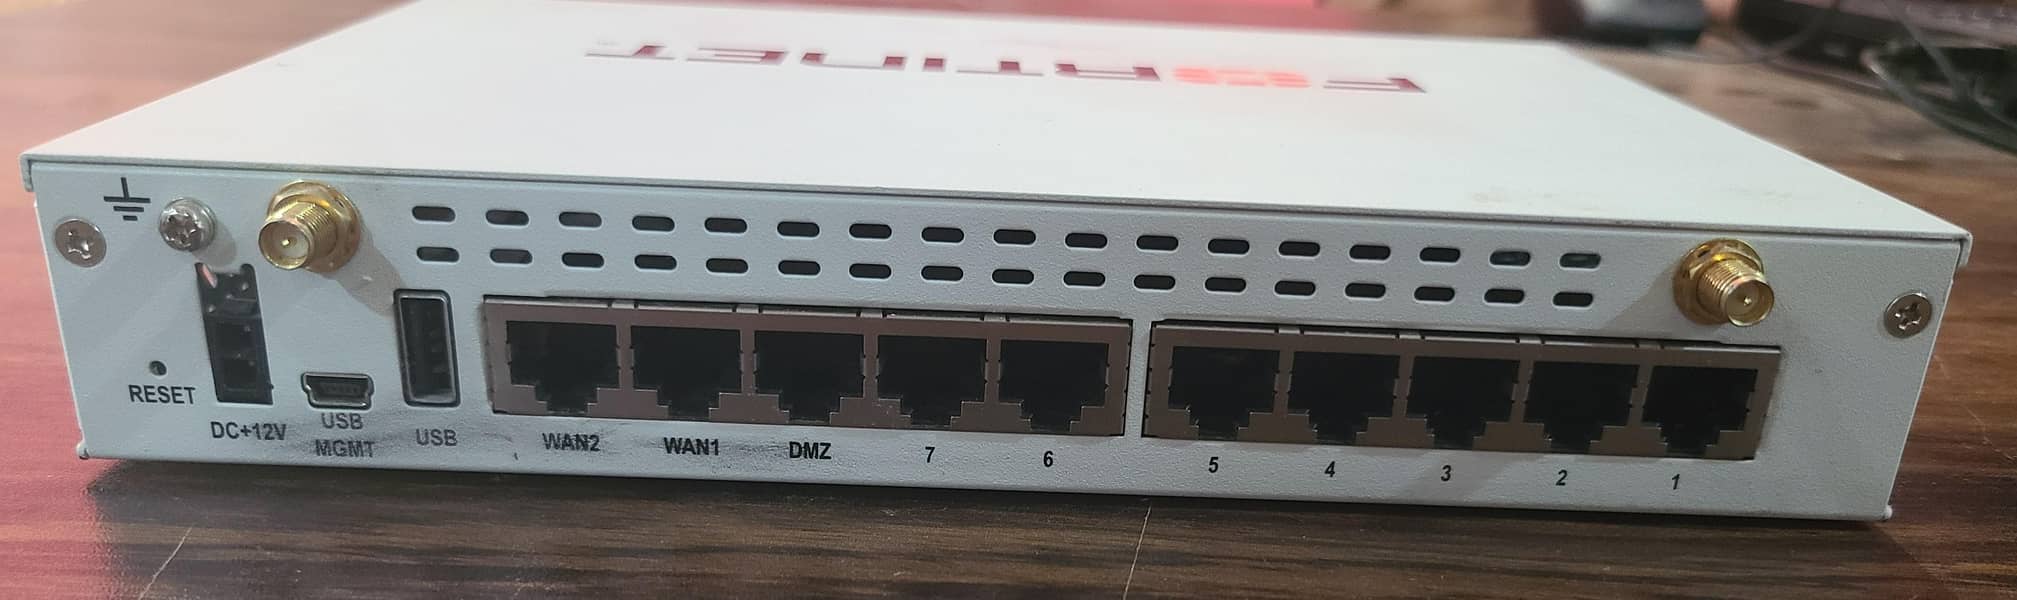 Fortinet/FortiGate-60D/Next/Generation/Firewall/UTM/Appliance (USED) 10